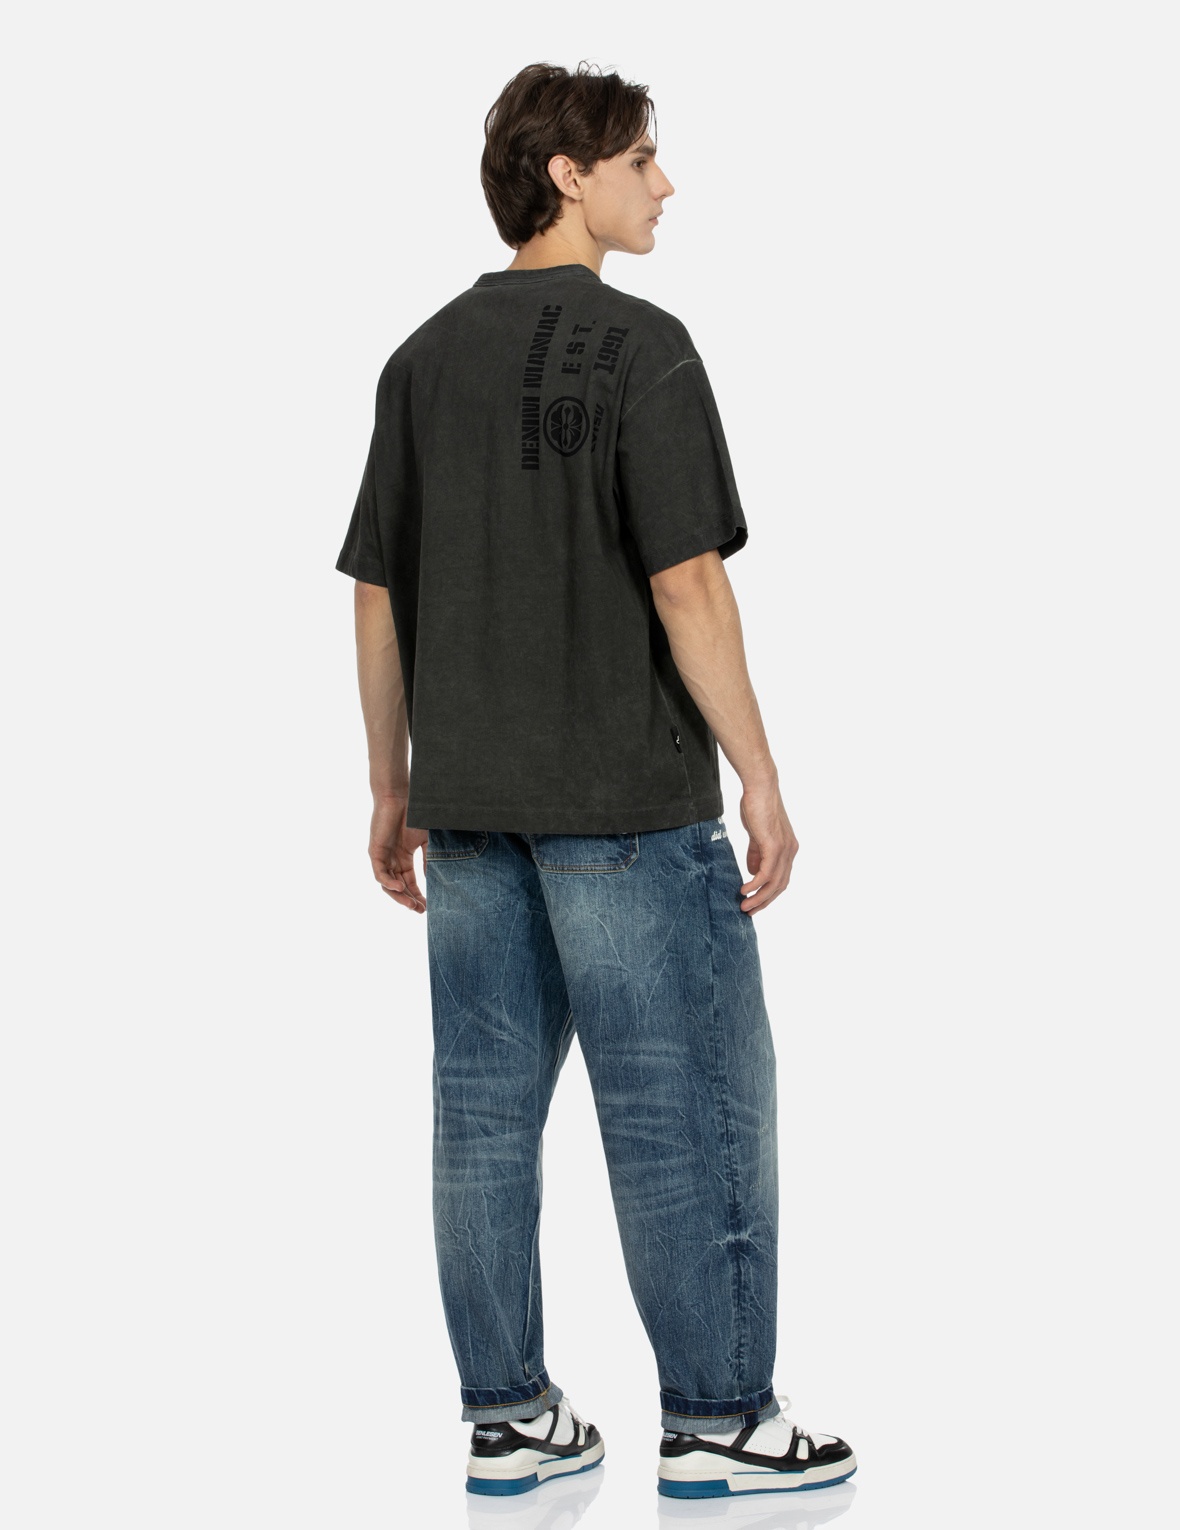 GODHEAD EMBROIDERY AND KAMON PRINT LOOSE FIT T-SHIRT - 3